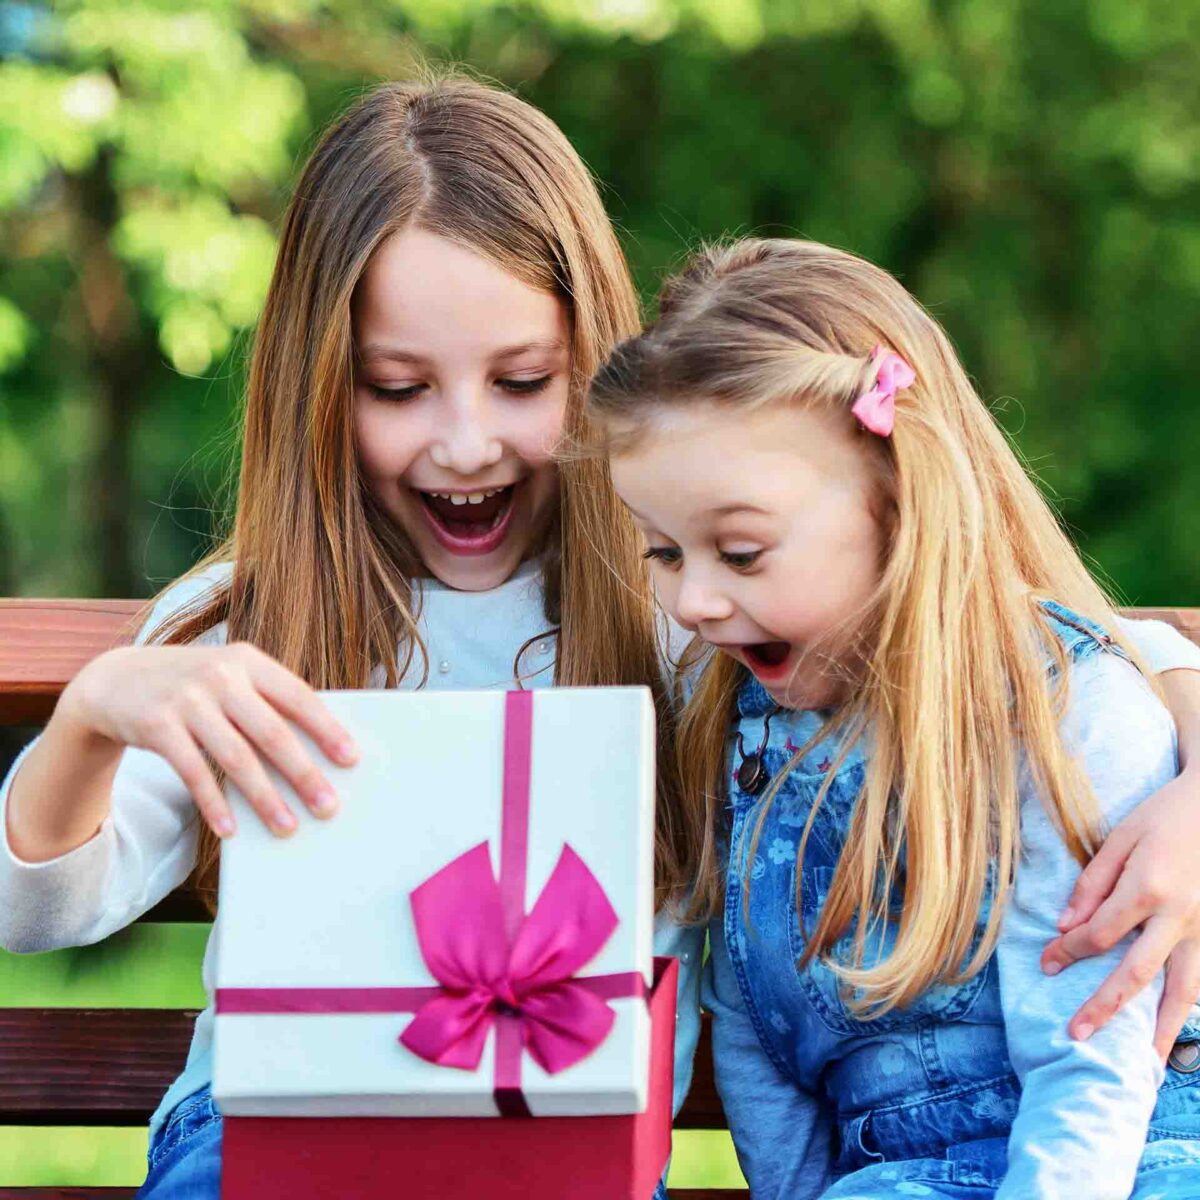 63 Top Birthday Wishes For Your Cousins – #7 Will Make Their Day